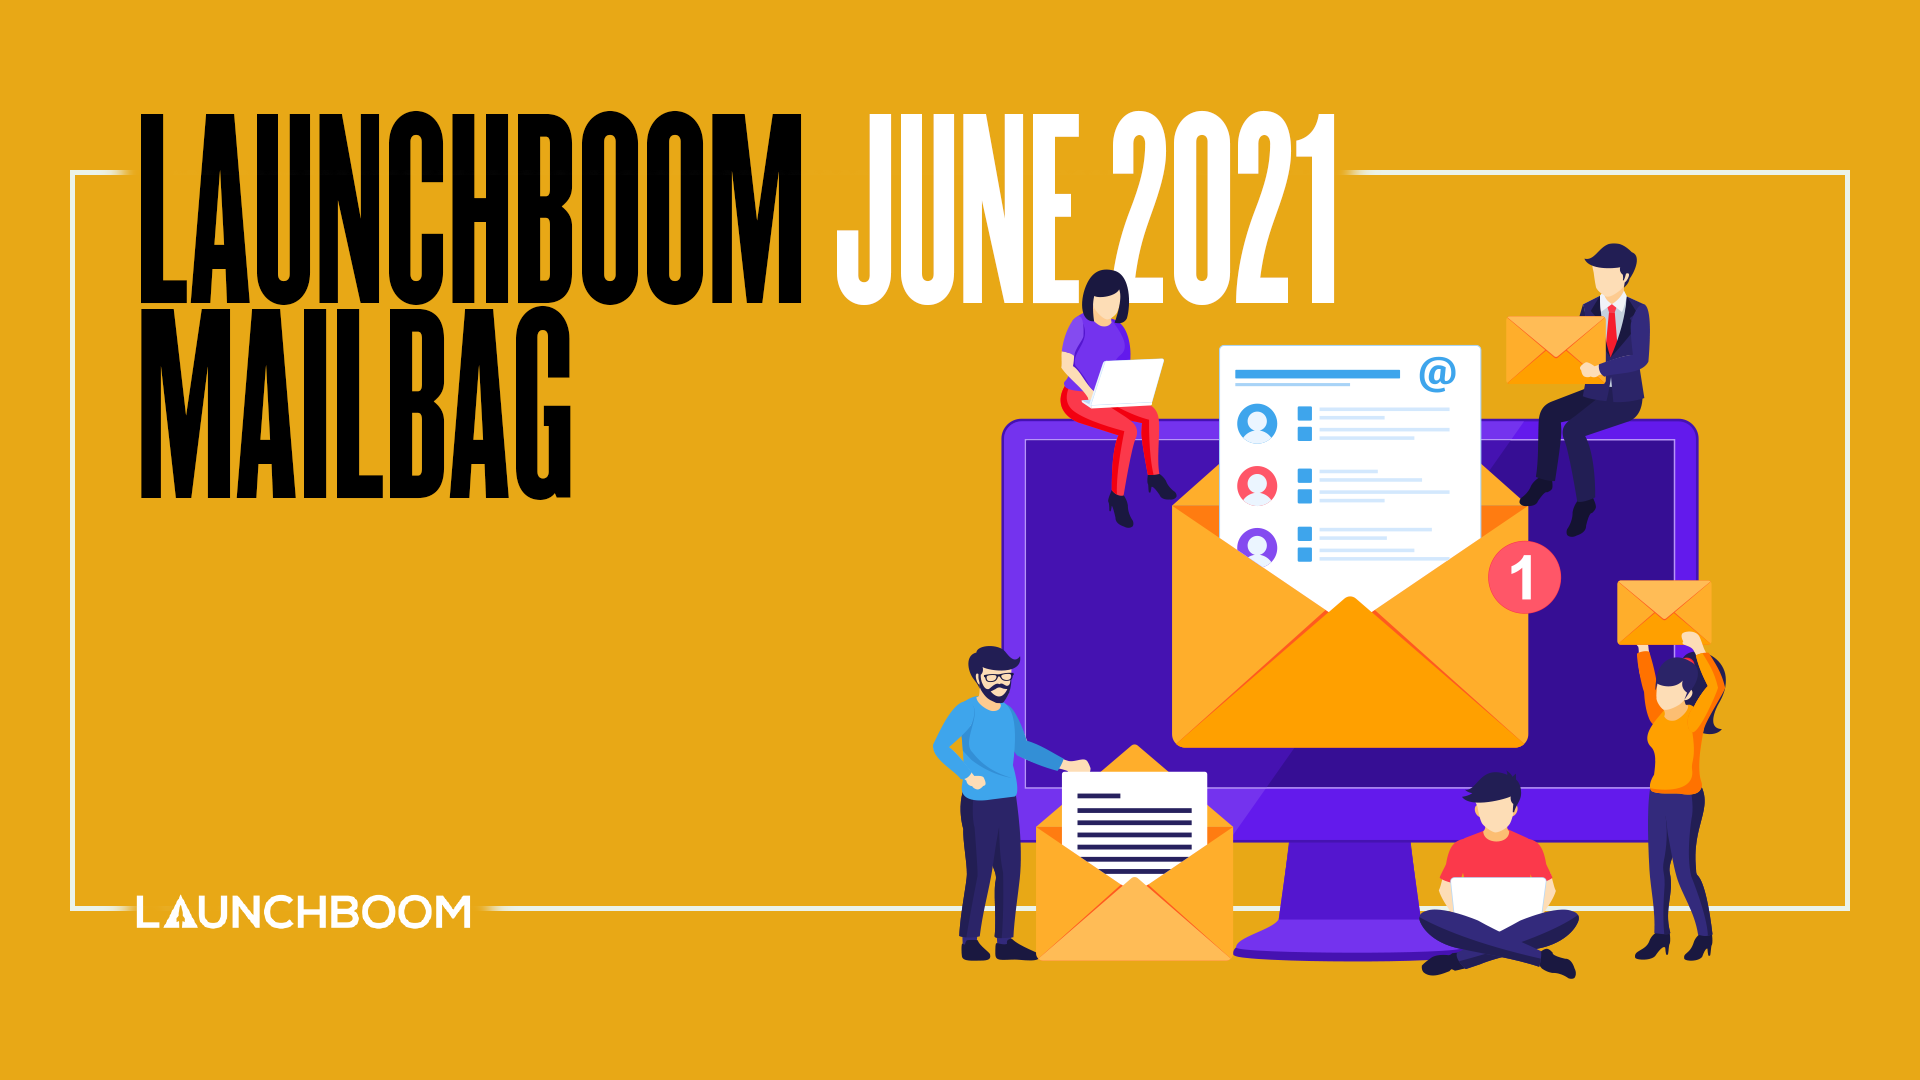 June 2021 LaunchBoom Mailbag: where we work, crowdfunding video script, and perk structures